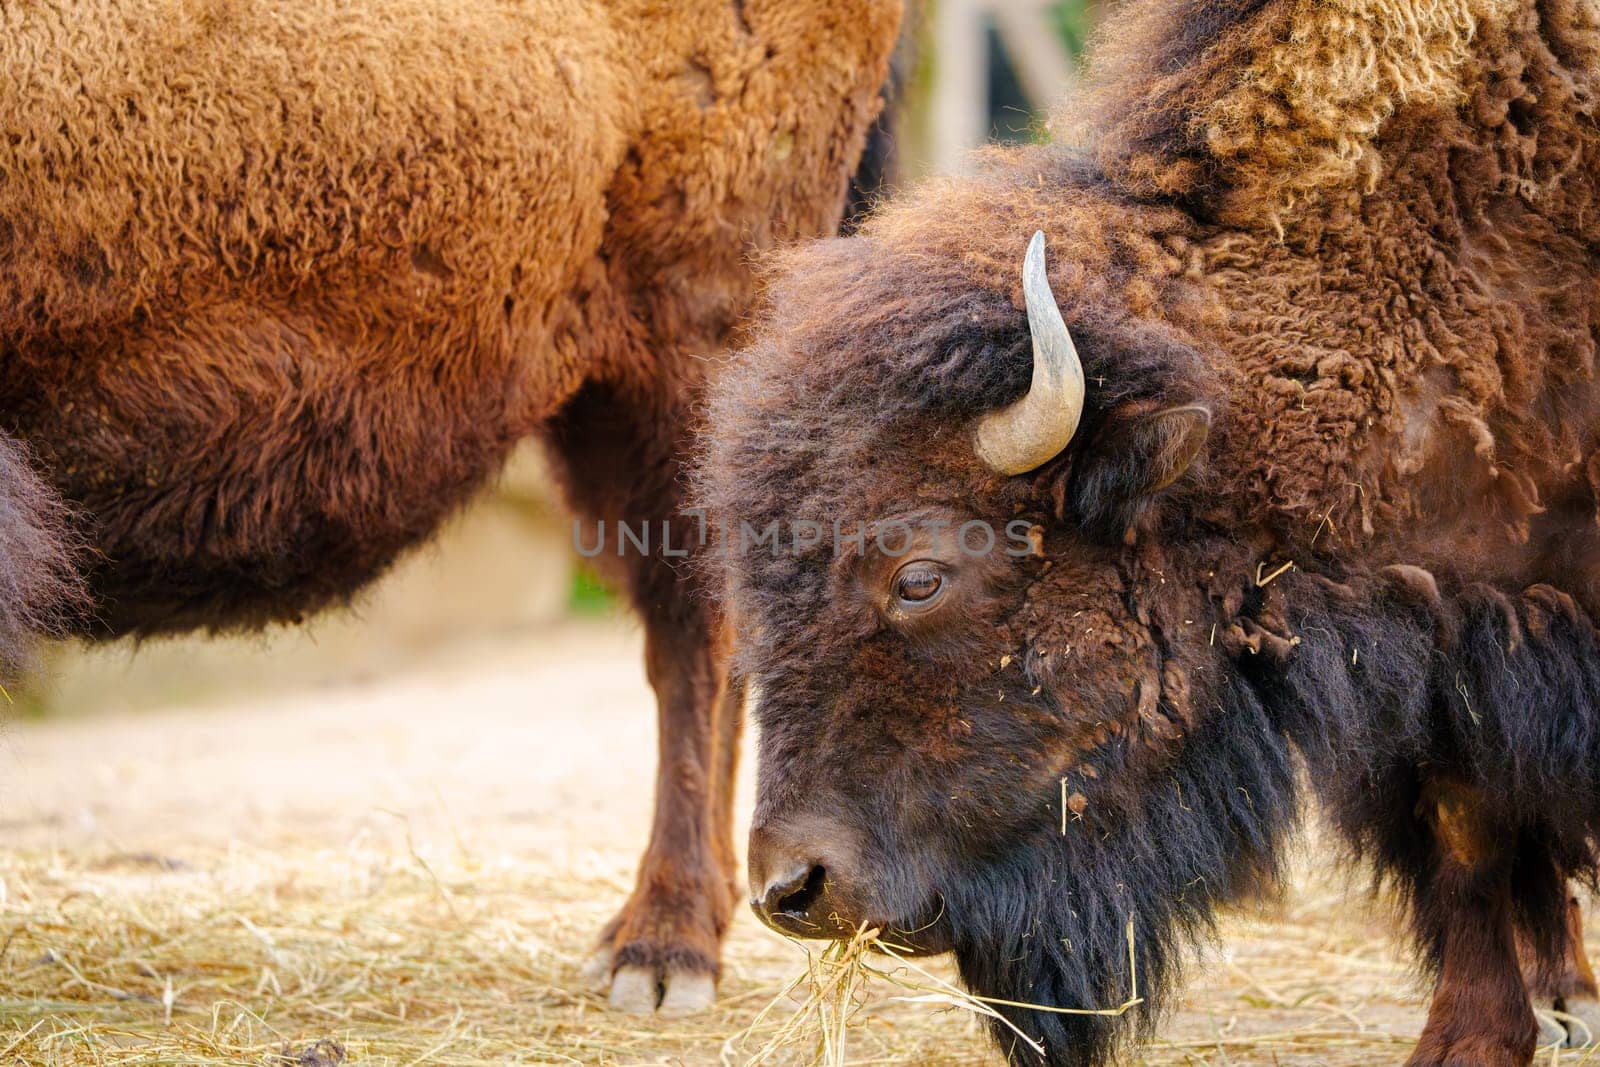 Close-up of a magnificent bison peacefully grazing on dry grass in its natural habitat. This stunning wildlife photography print captures the raw beauty of nature.